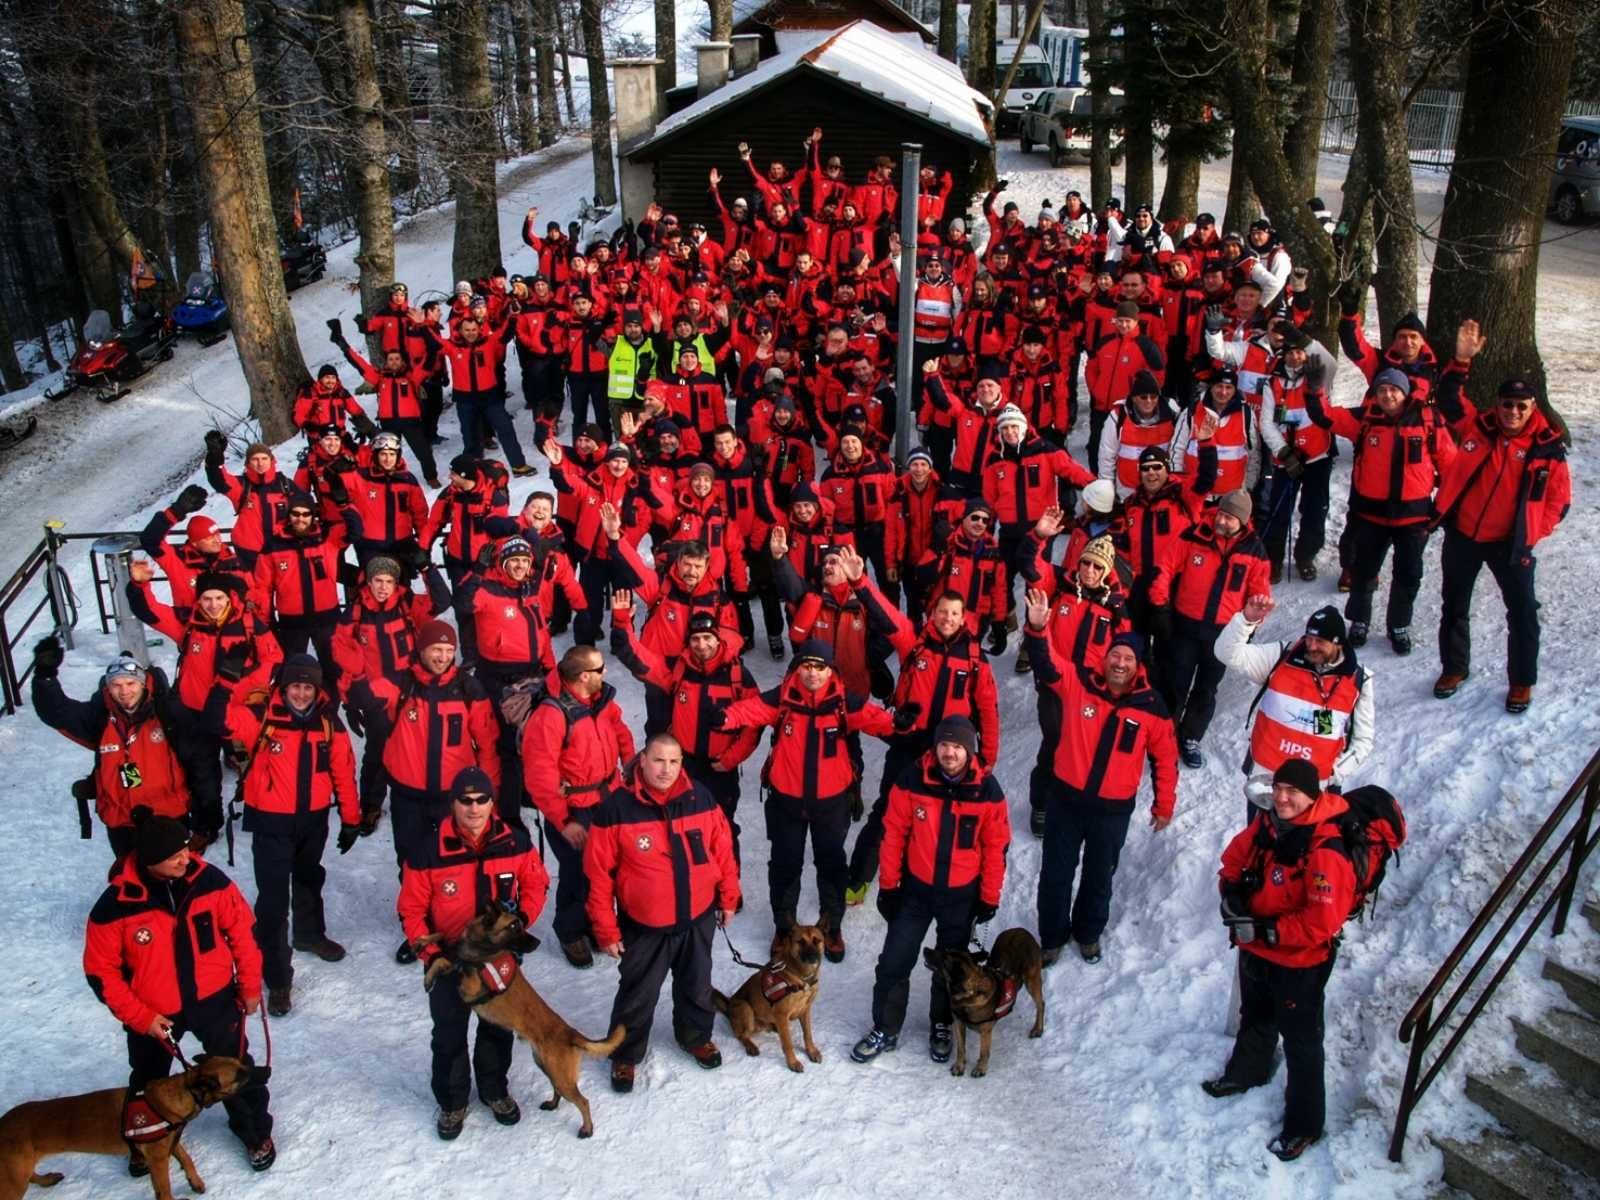 Croatian Mountain Rescue Service celebrates 72nd birthday: We don't need wishes or gifts, we only ask you for one thing